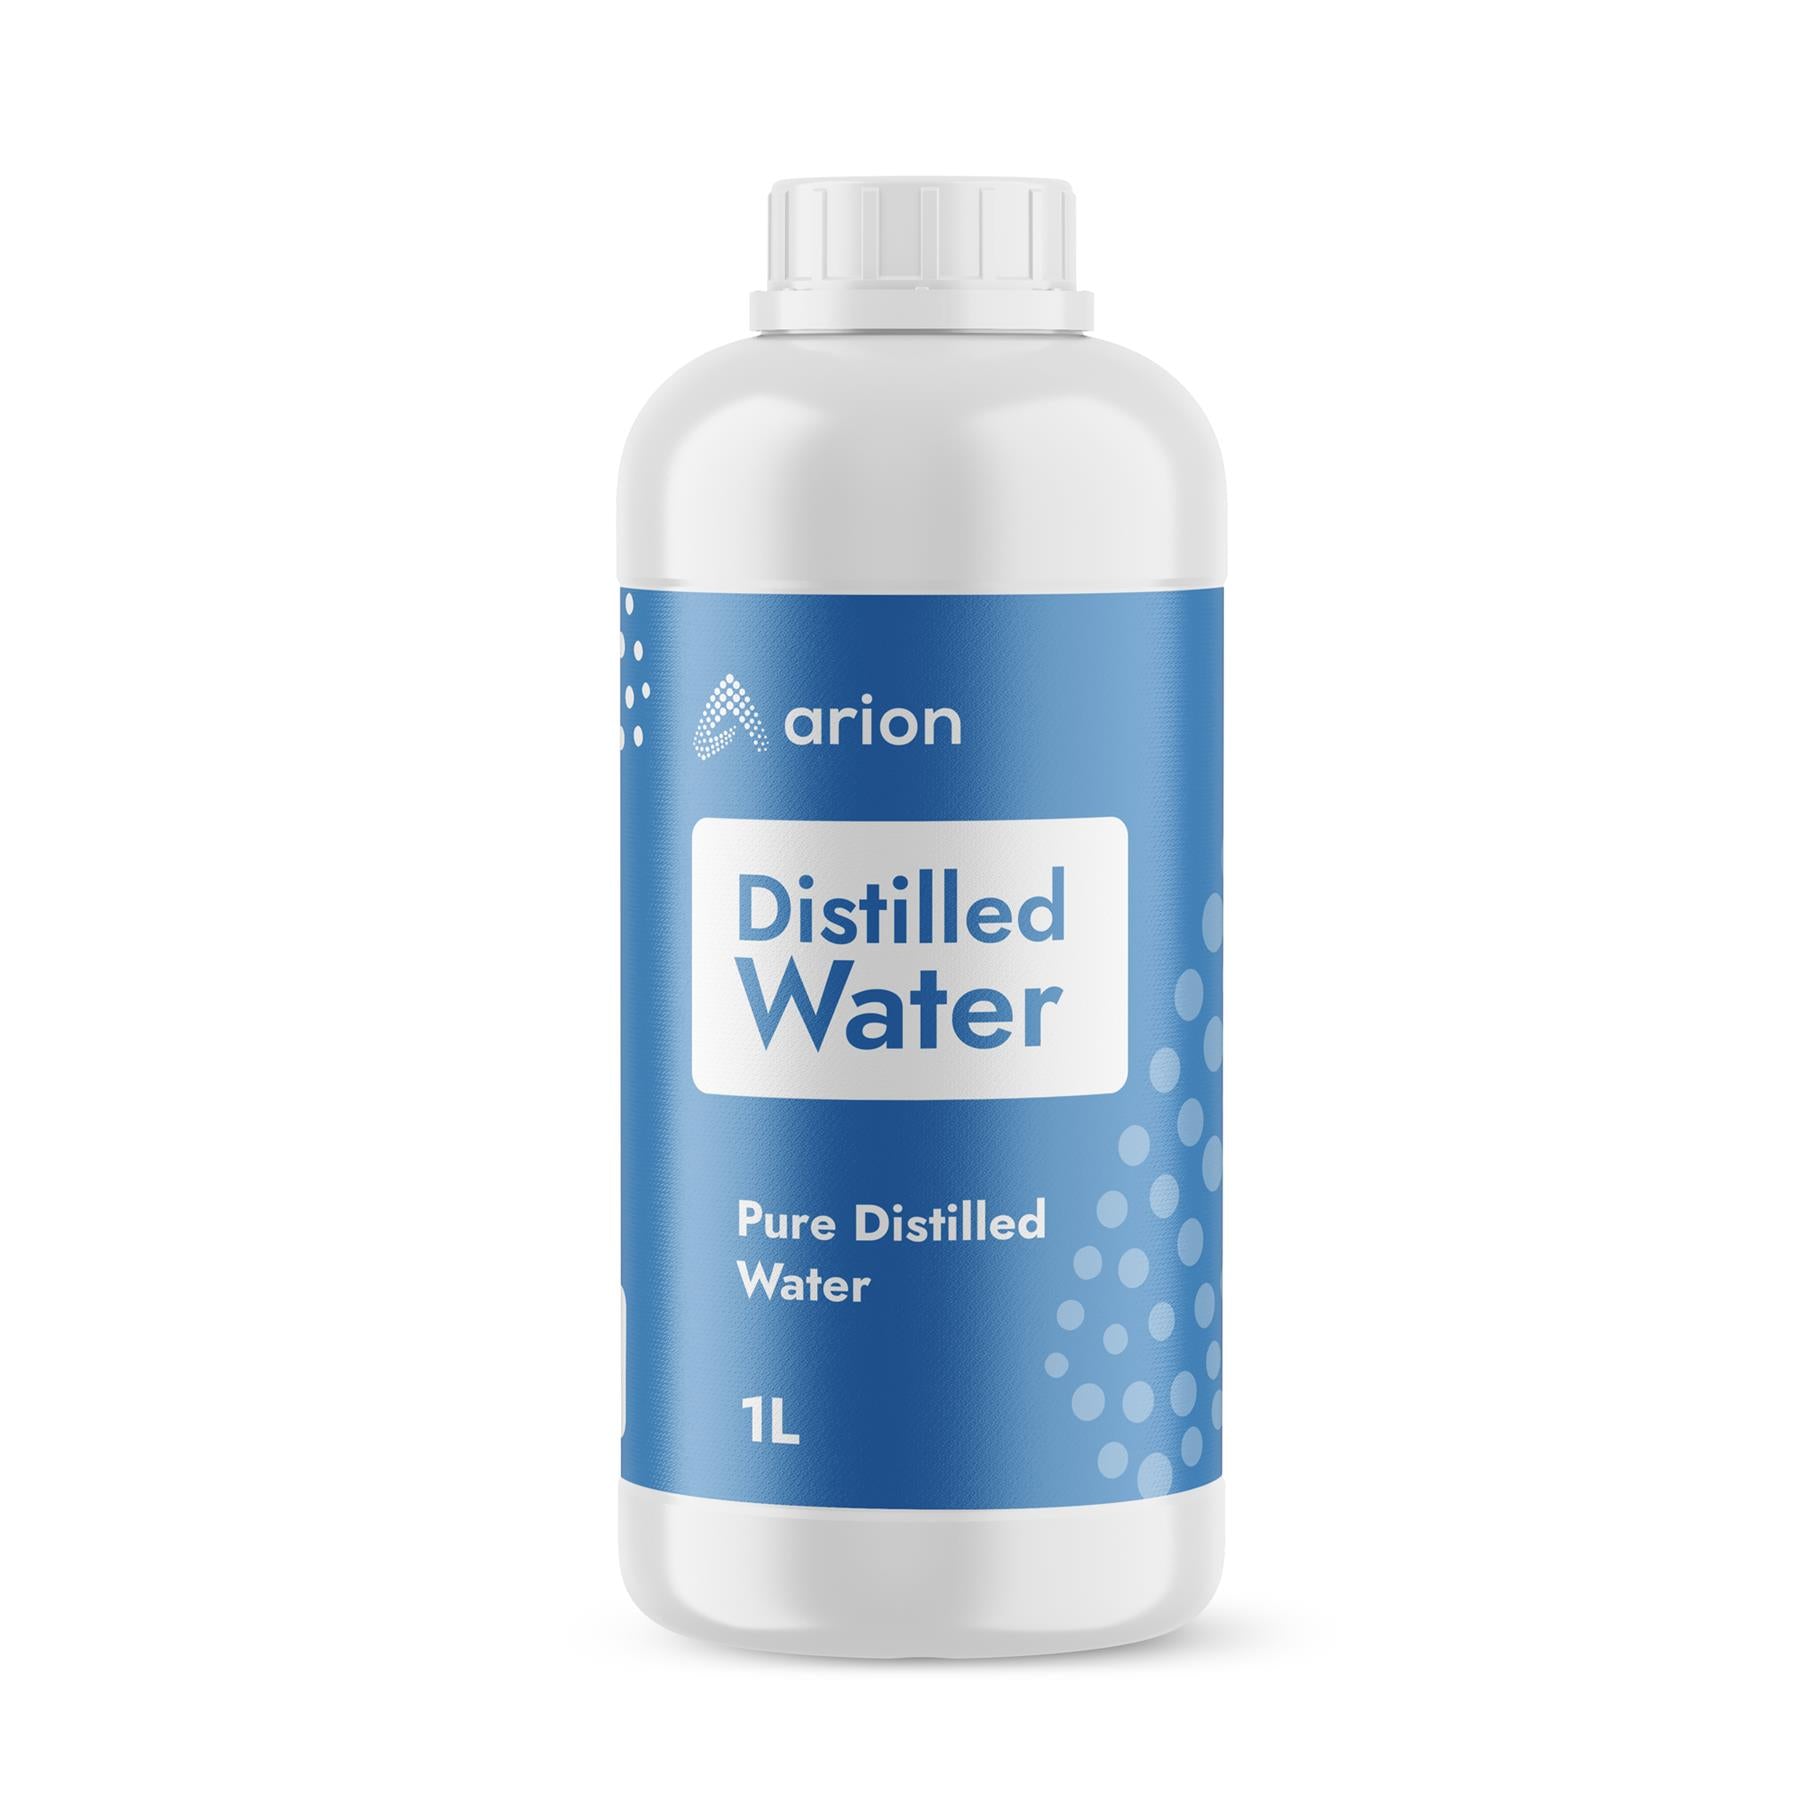 Winstons Distilled Water - Just Horse Riders